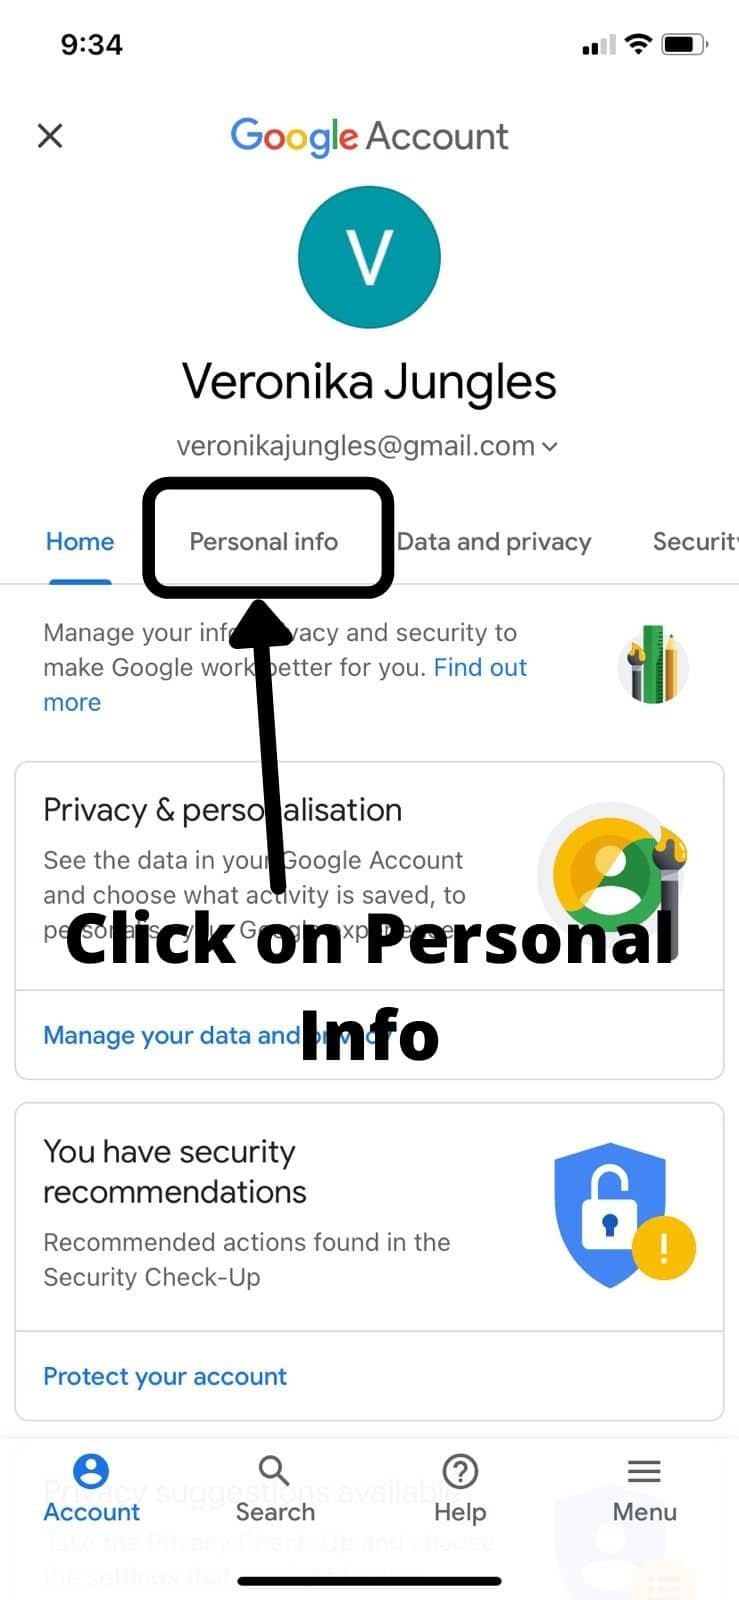 Click on Personal Info